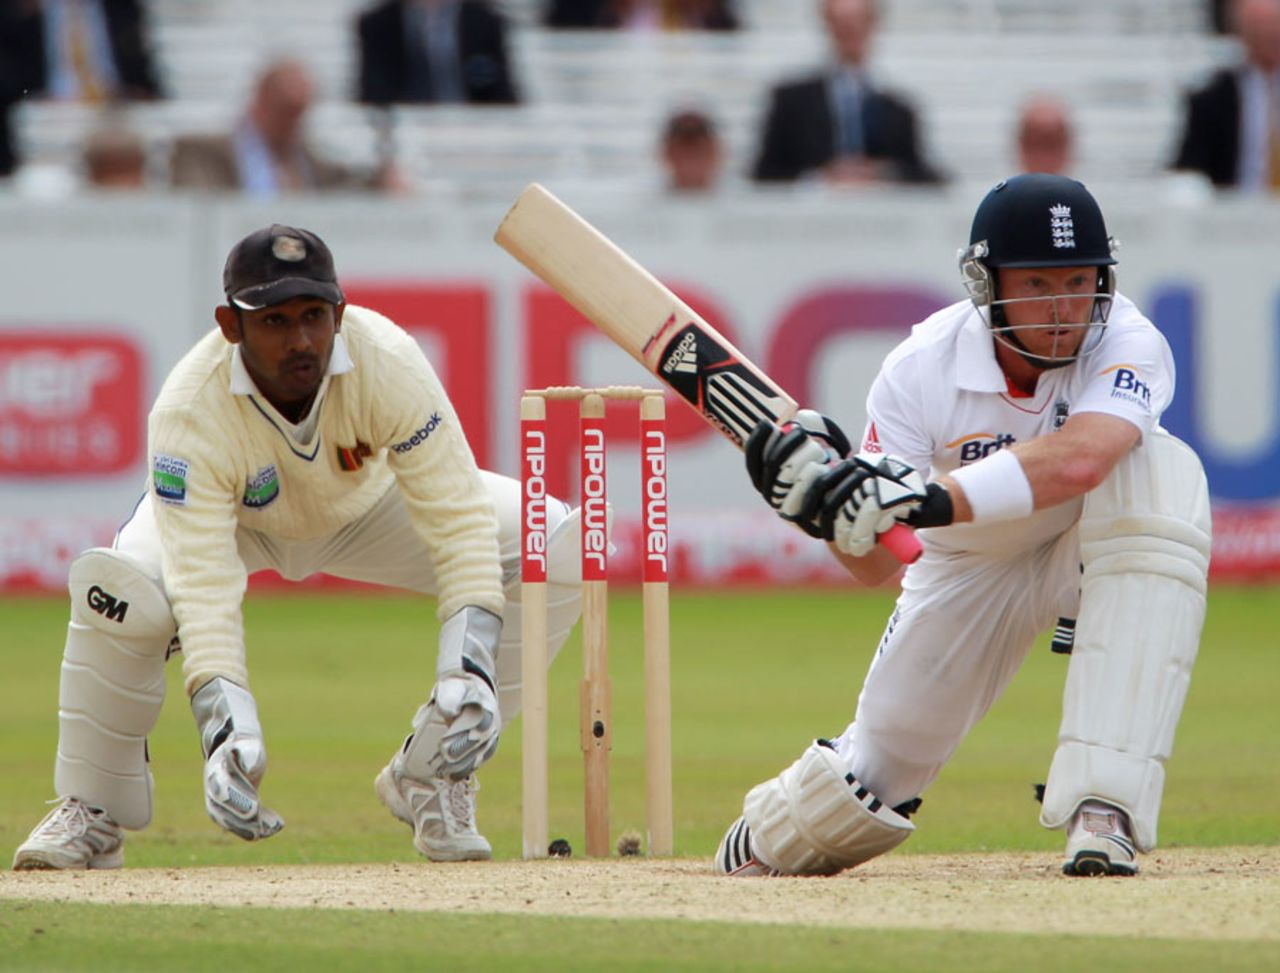 Ian Bell made his quickest Test half-century, off 40 deliveries, England v Sri Lanka, 2nd Test, Lord's, 5th day, June 7, 2011